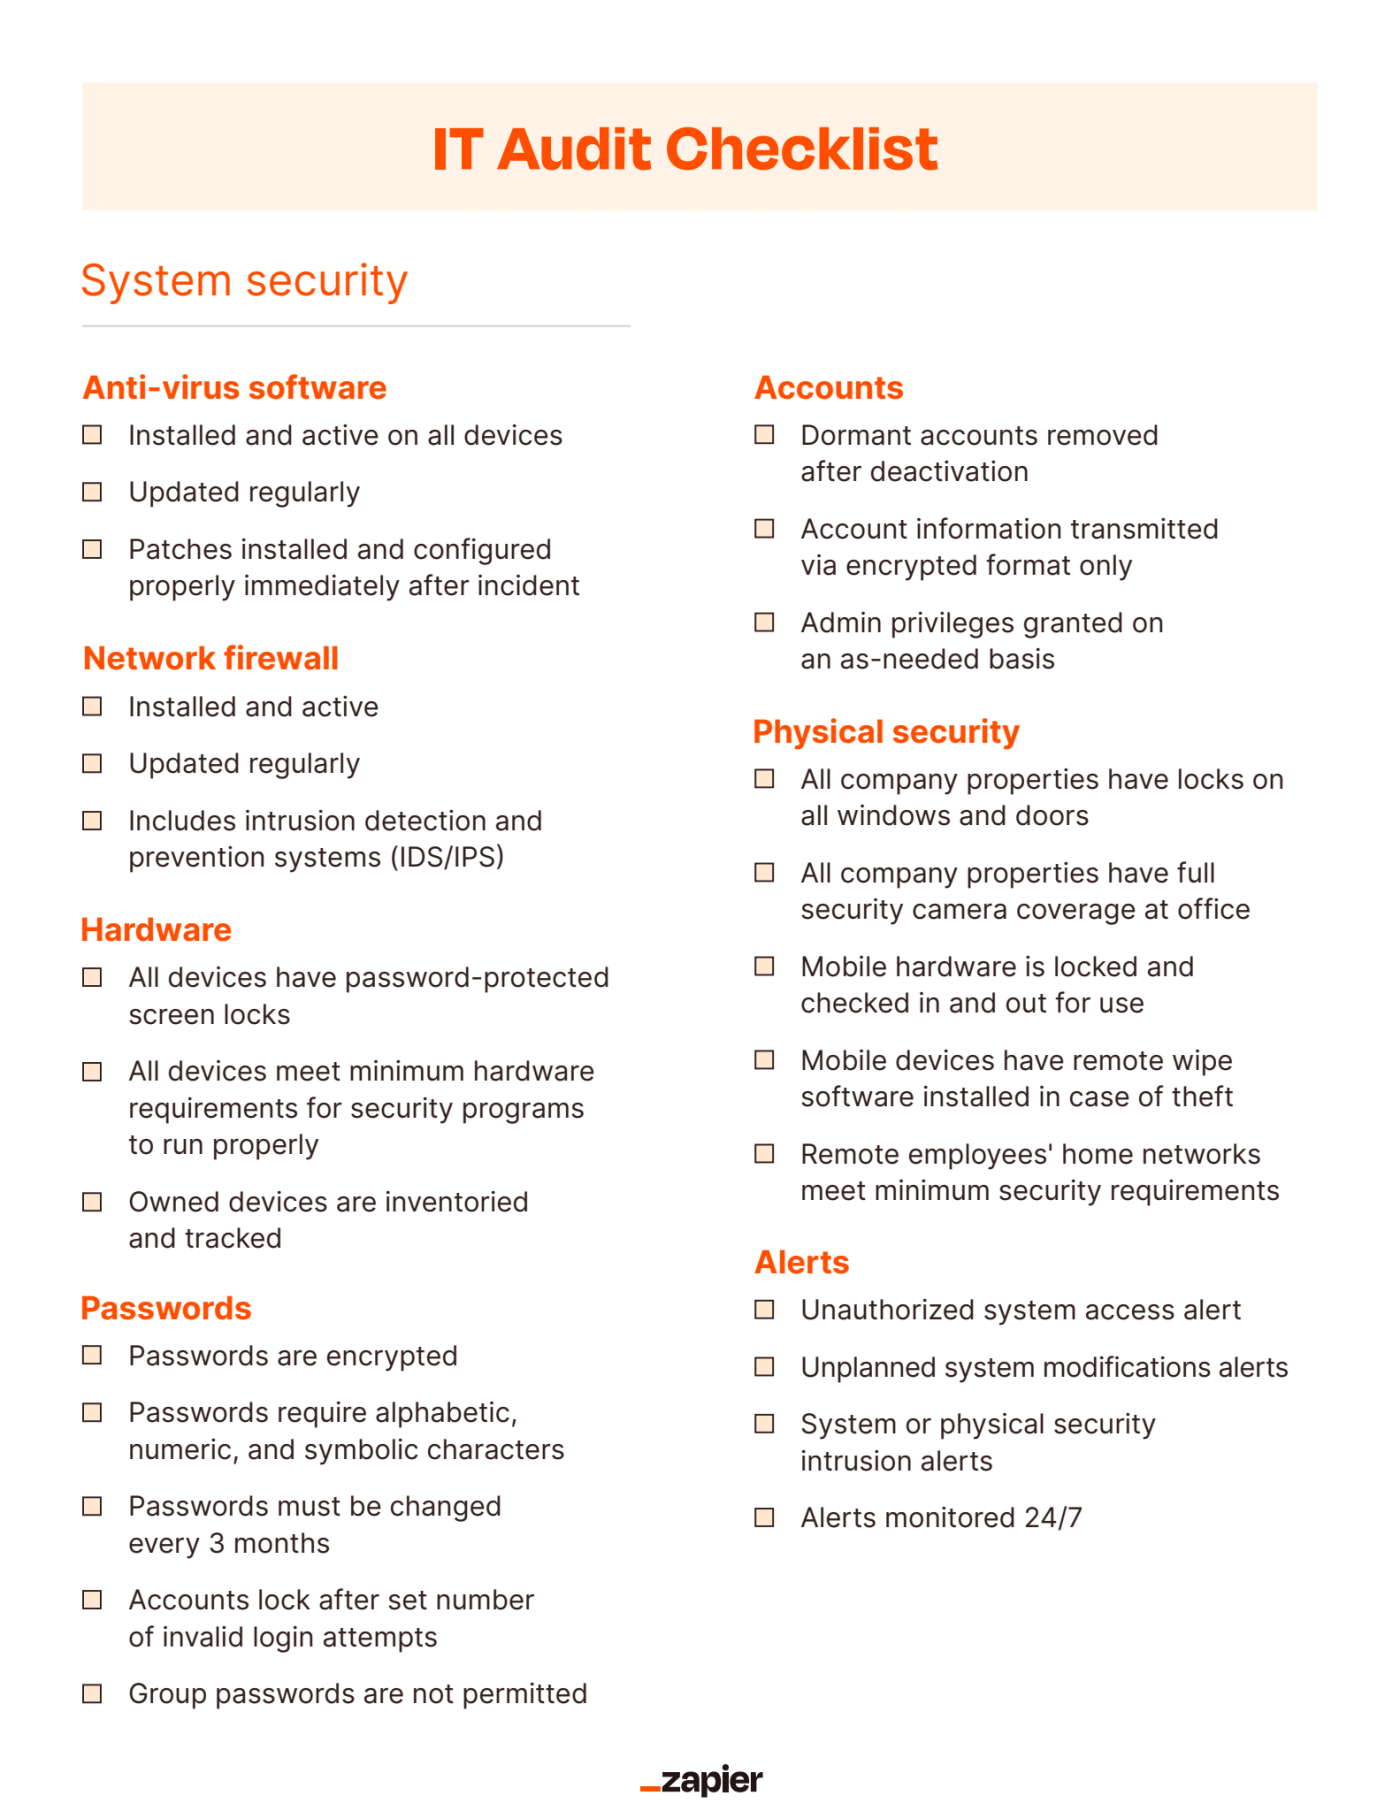 Editable IT audit checklist including steps around, system security, standards and procedures, performance monitoring, documentation and reporting and systems development